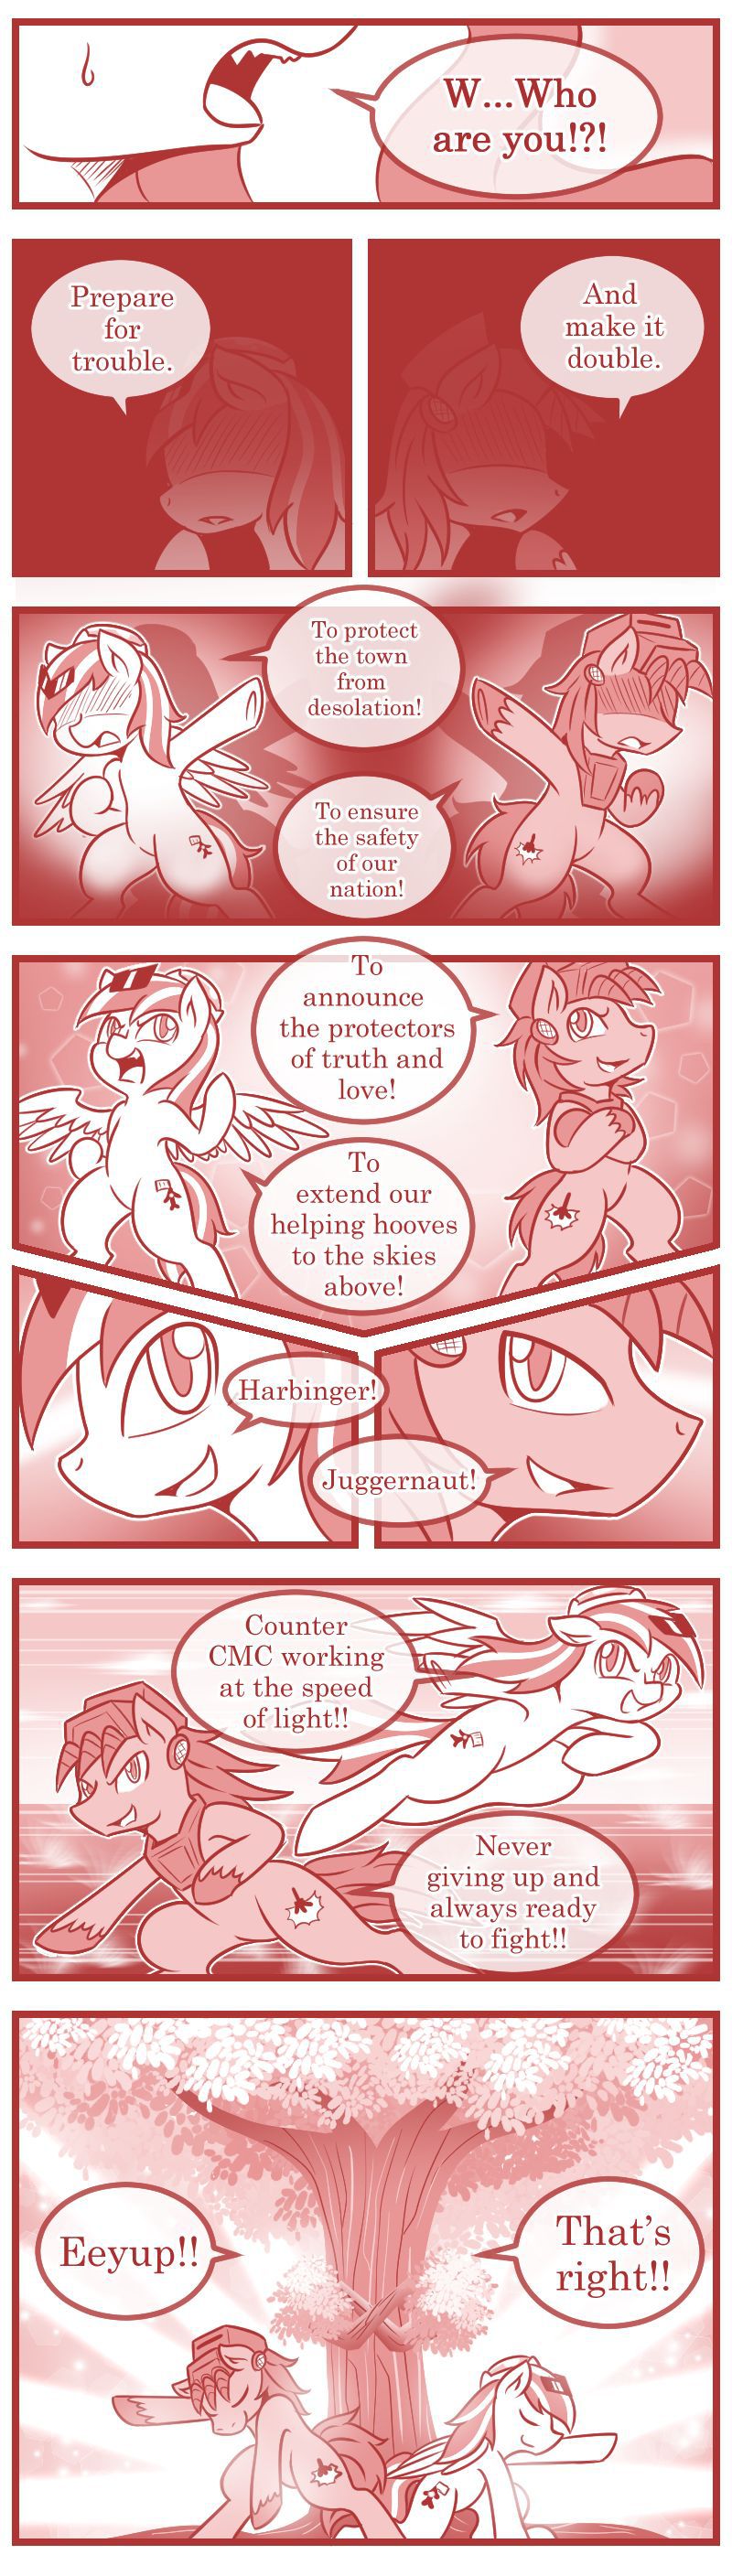 [Vavacung] Chaos Future (My Little Pony: Friendship is Magic) [Ongoing] 93